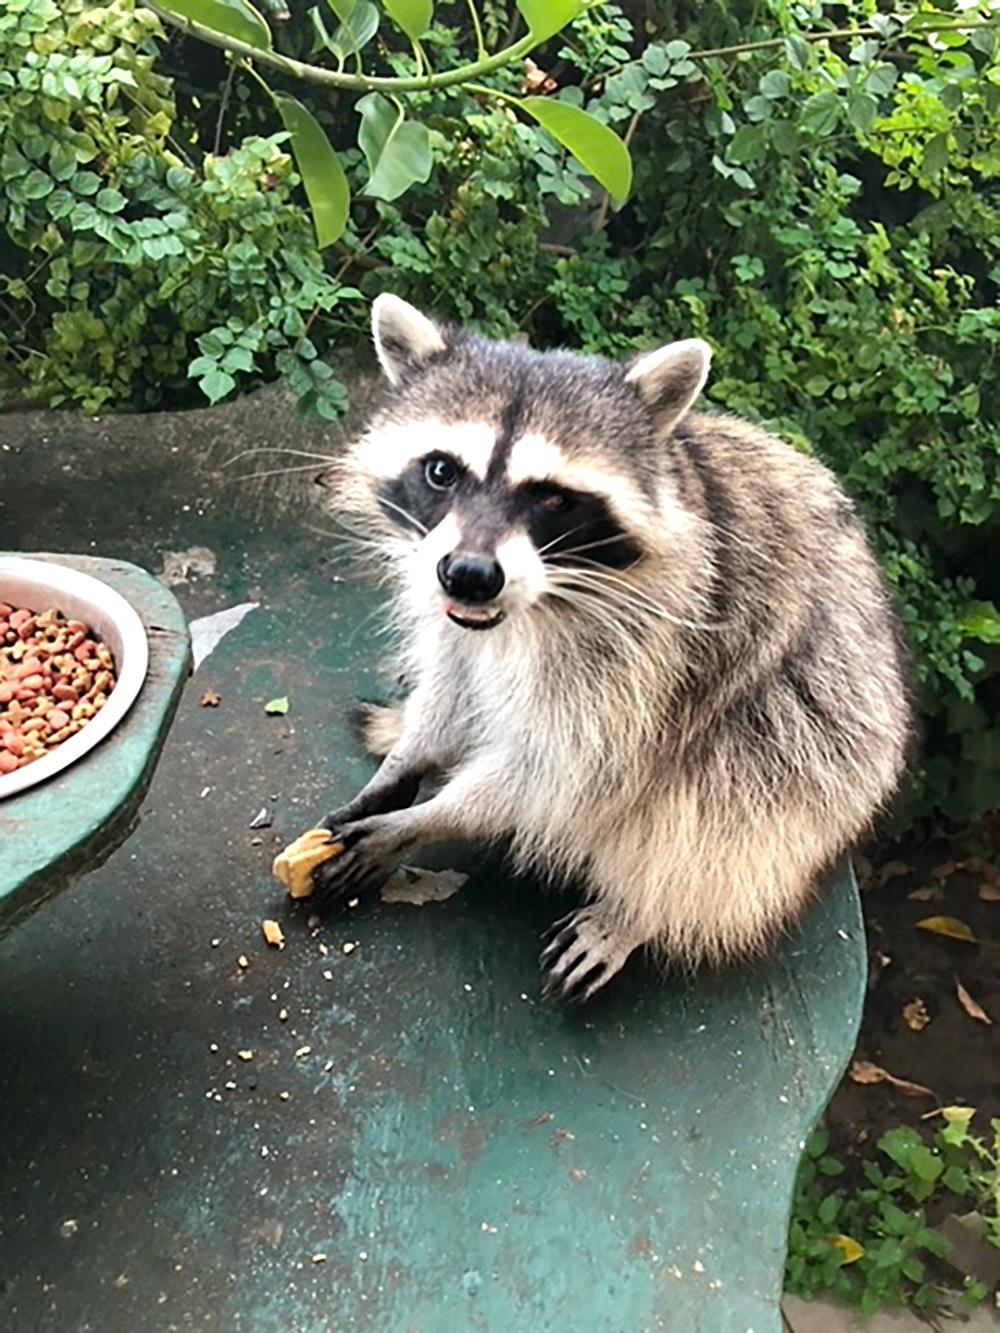 A raccoon sits on a green table, holding a peanut butter cookie, amidst a lush garden.